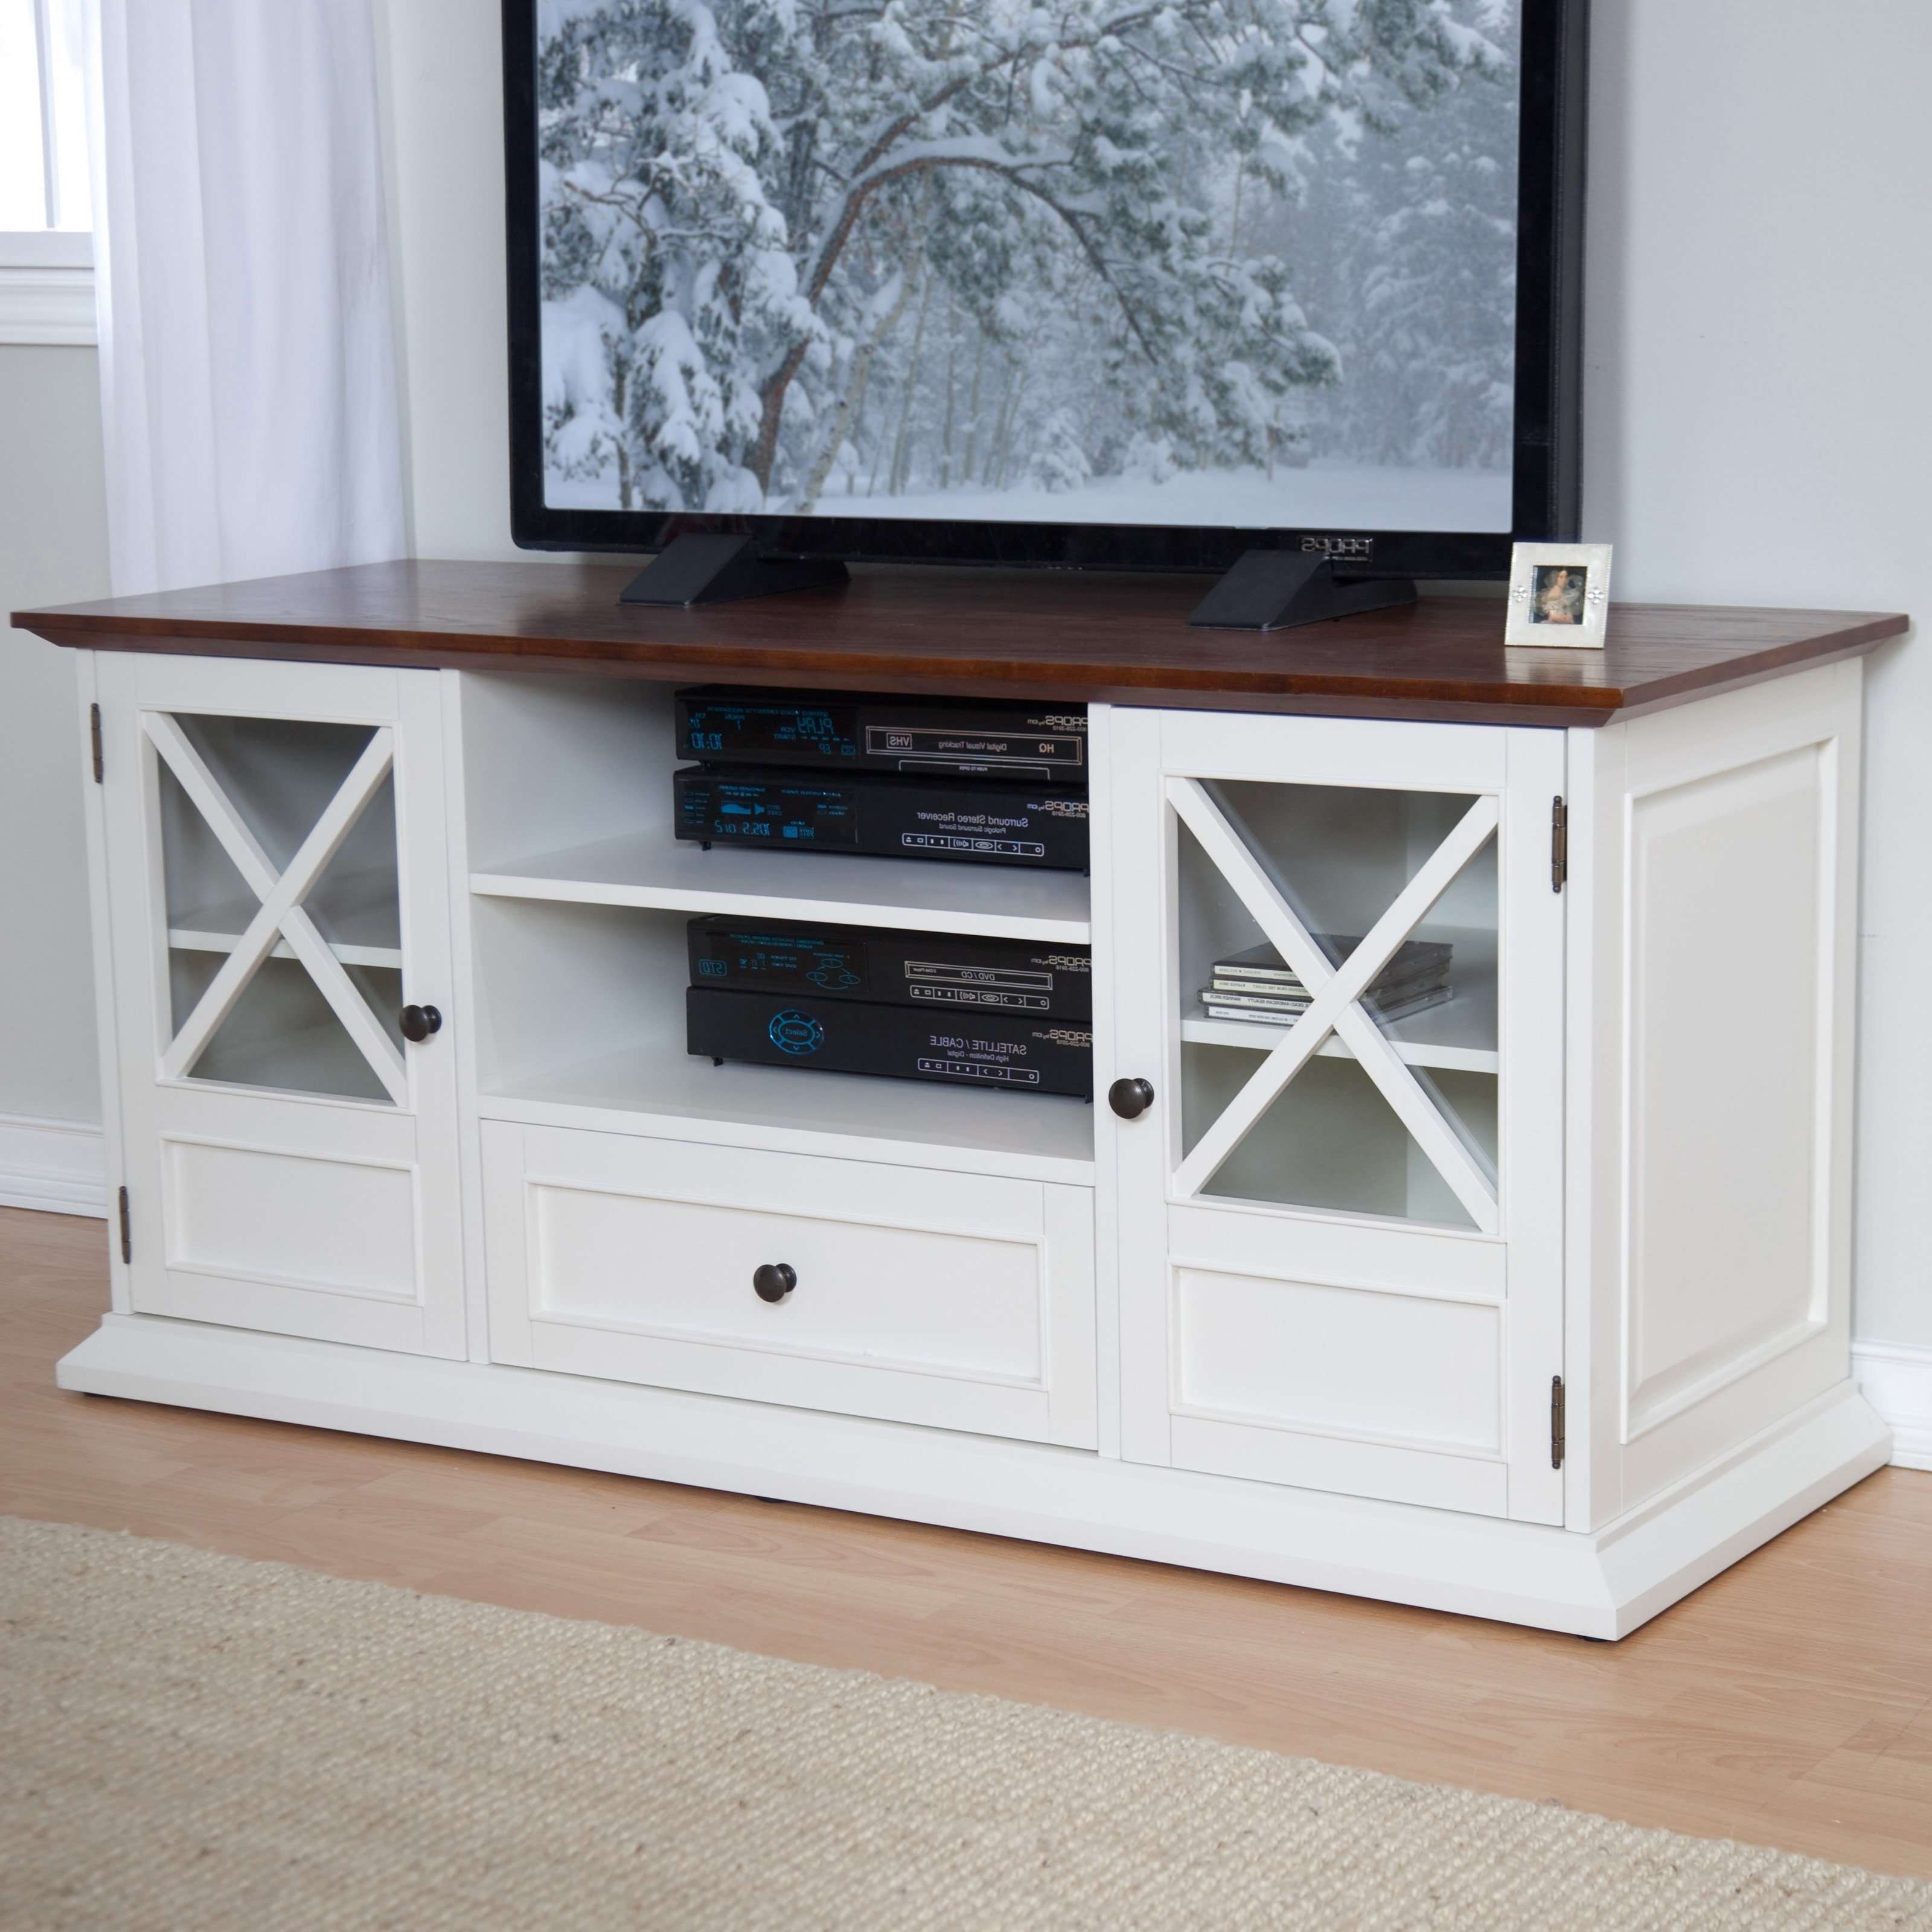 Tv Stands & Entertainment Centers | Hayneedle Within Rustic 60 Inch Tv Stands (View 4 of 15)